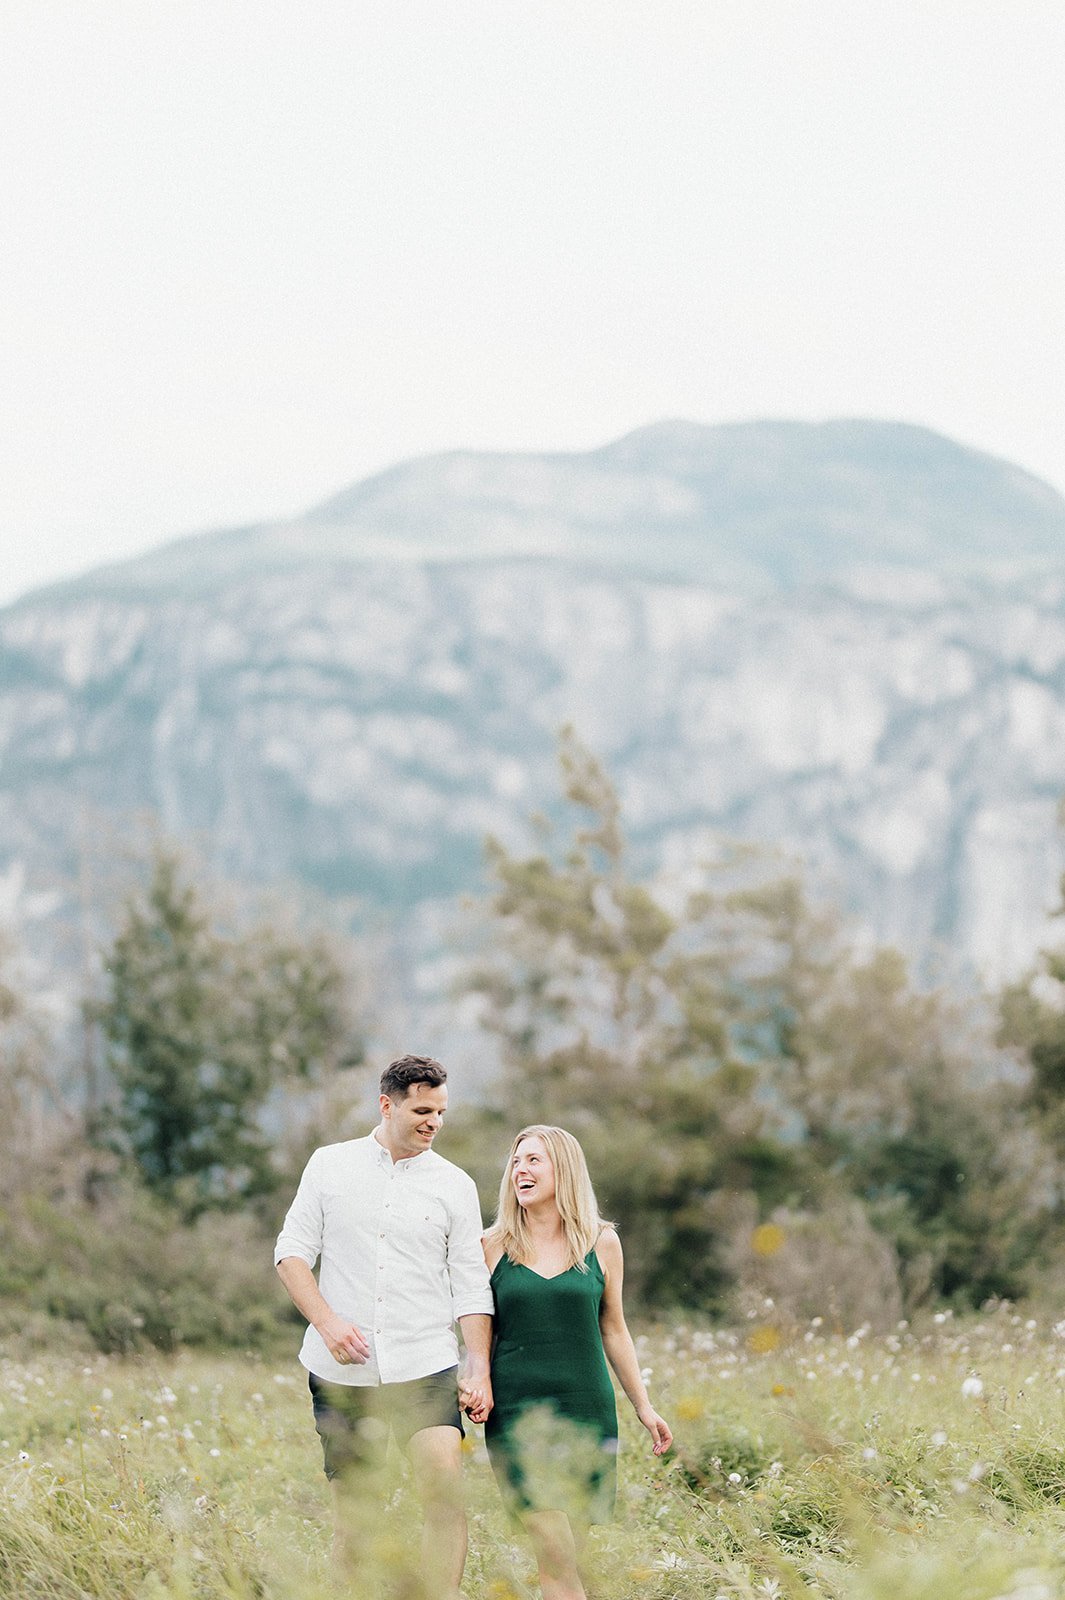 A young and beautiful engaged couple strolls through a grassy field in front of a large mountain in Squamish, BC.